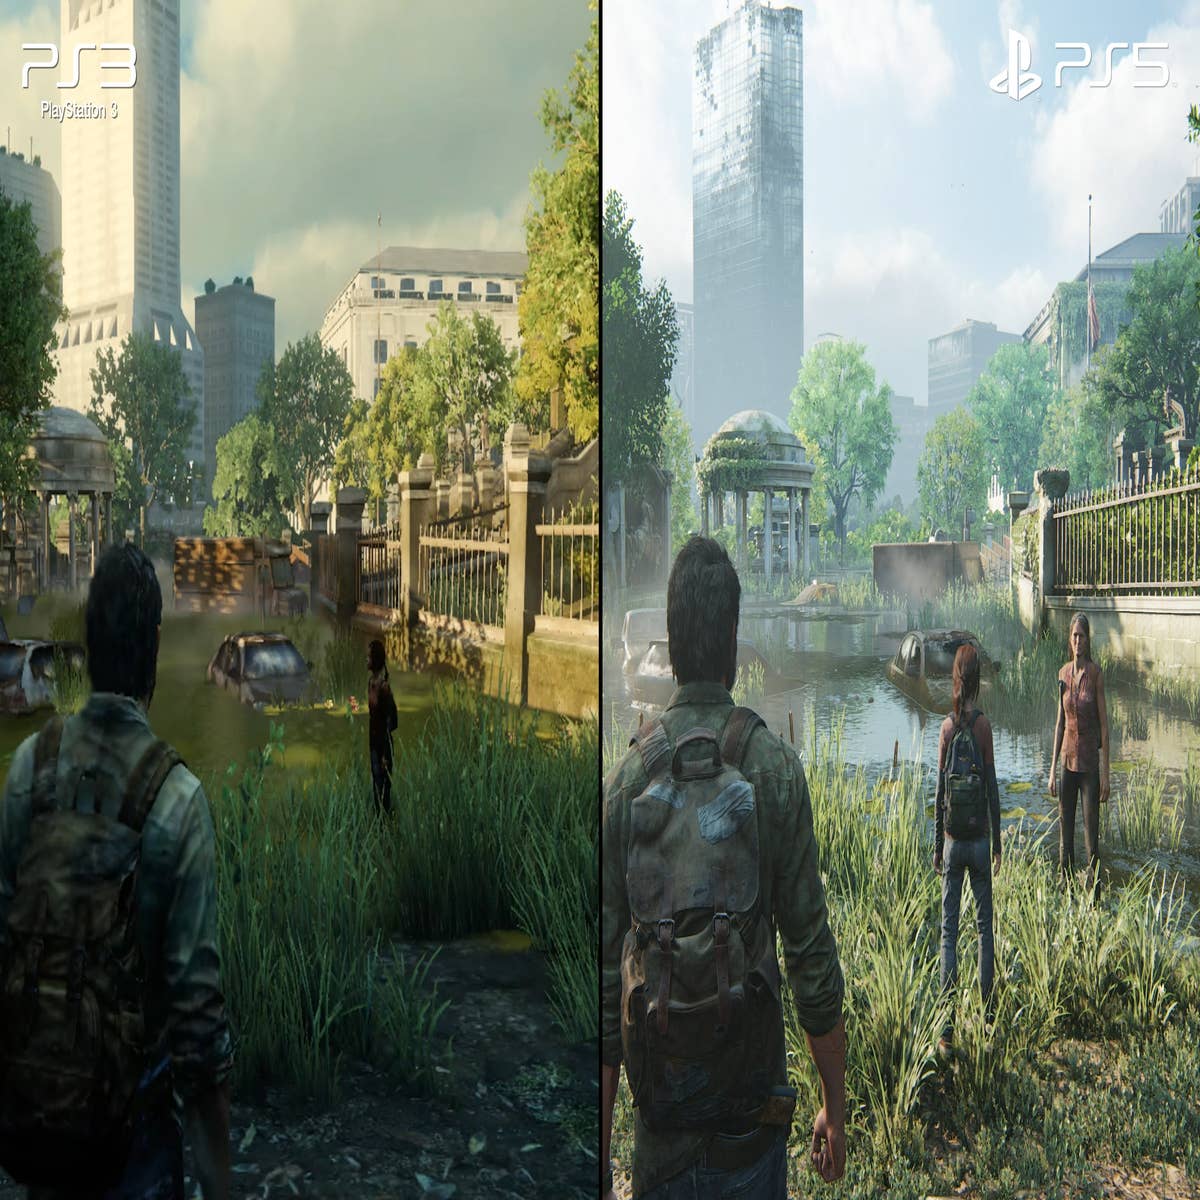 The Last Of Us Part 1's in-progress mod reimagines the game as a